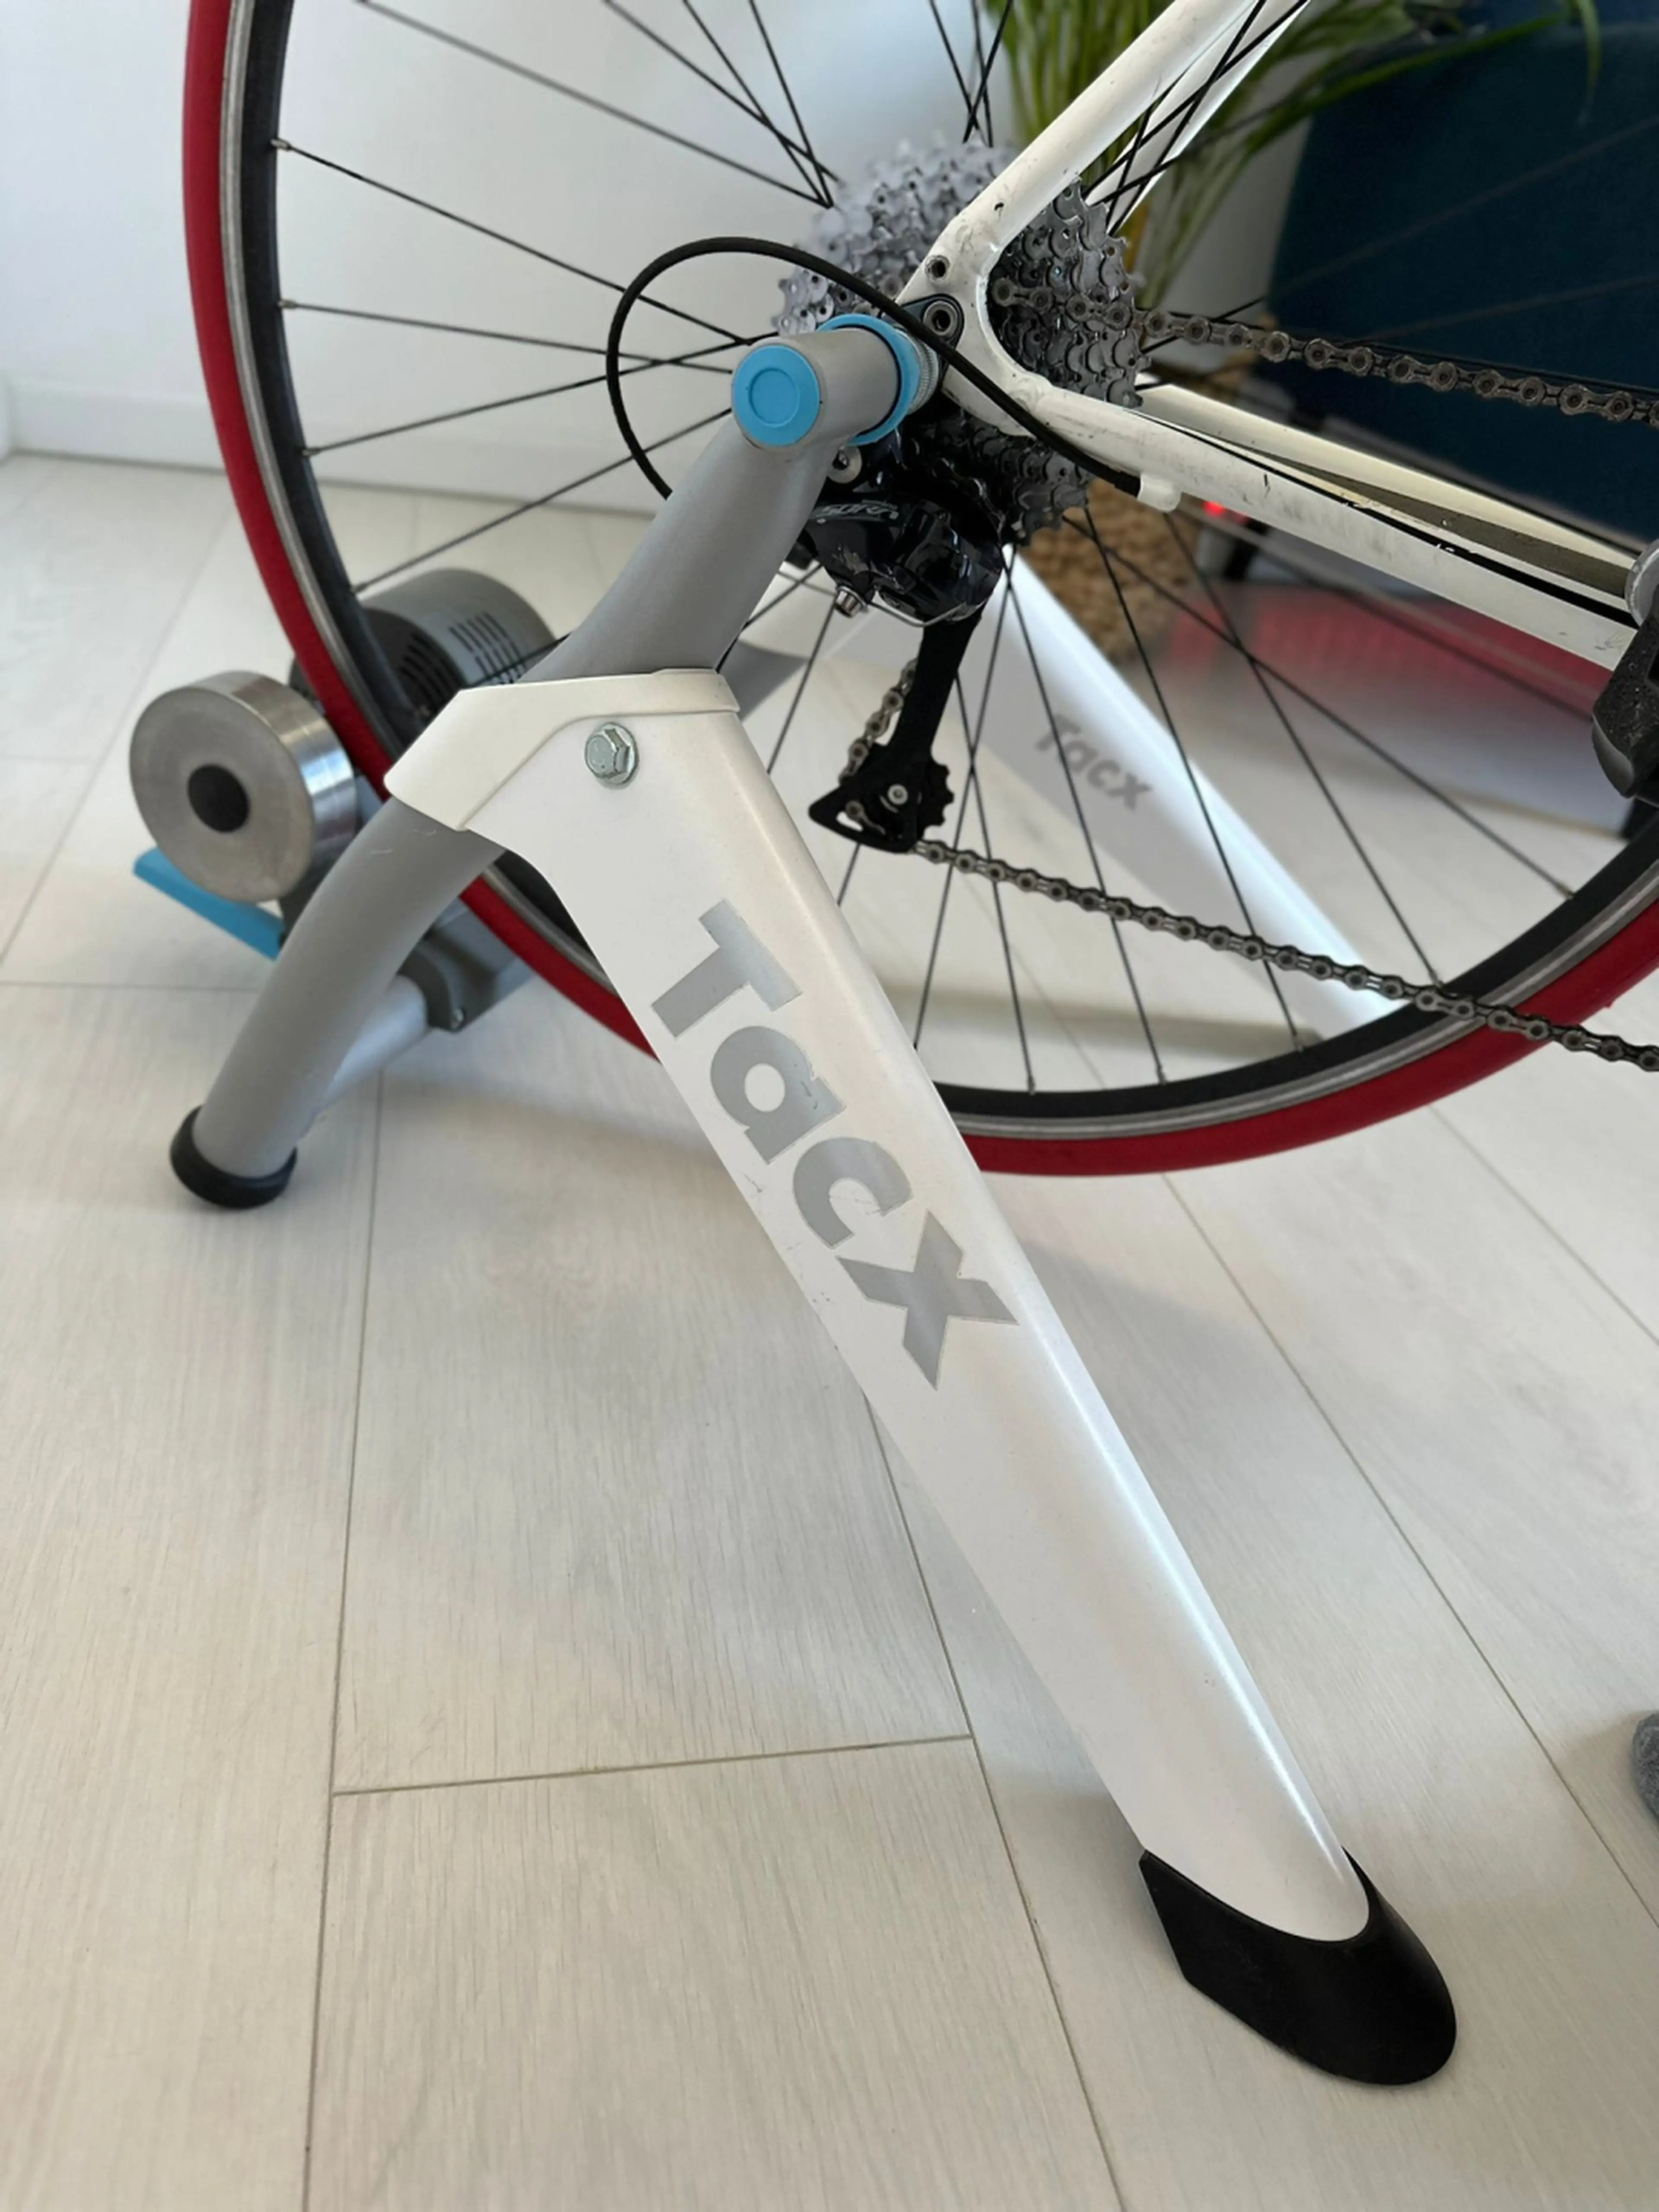 Image Home Tainer Flow Smart T2240, tacx